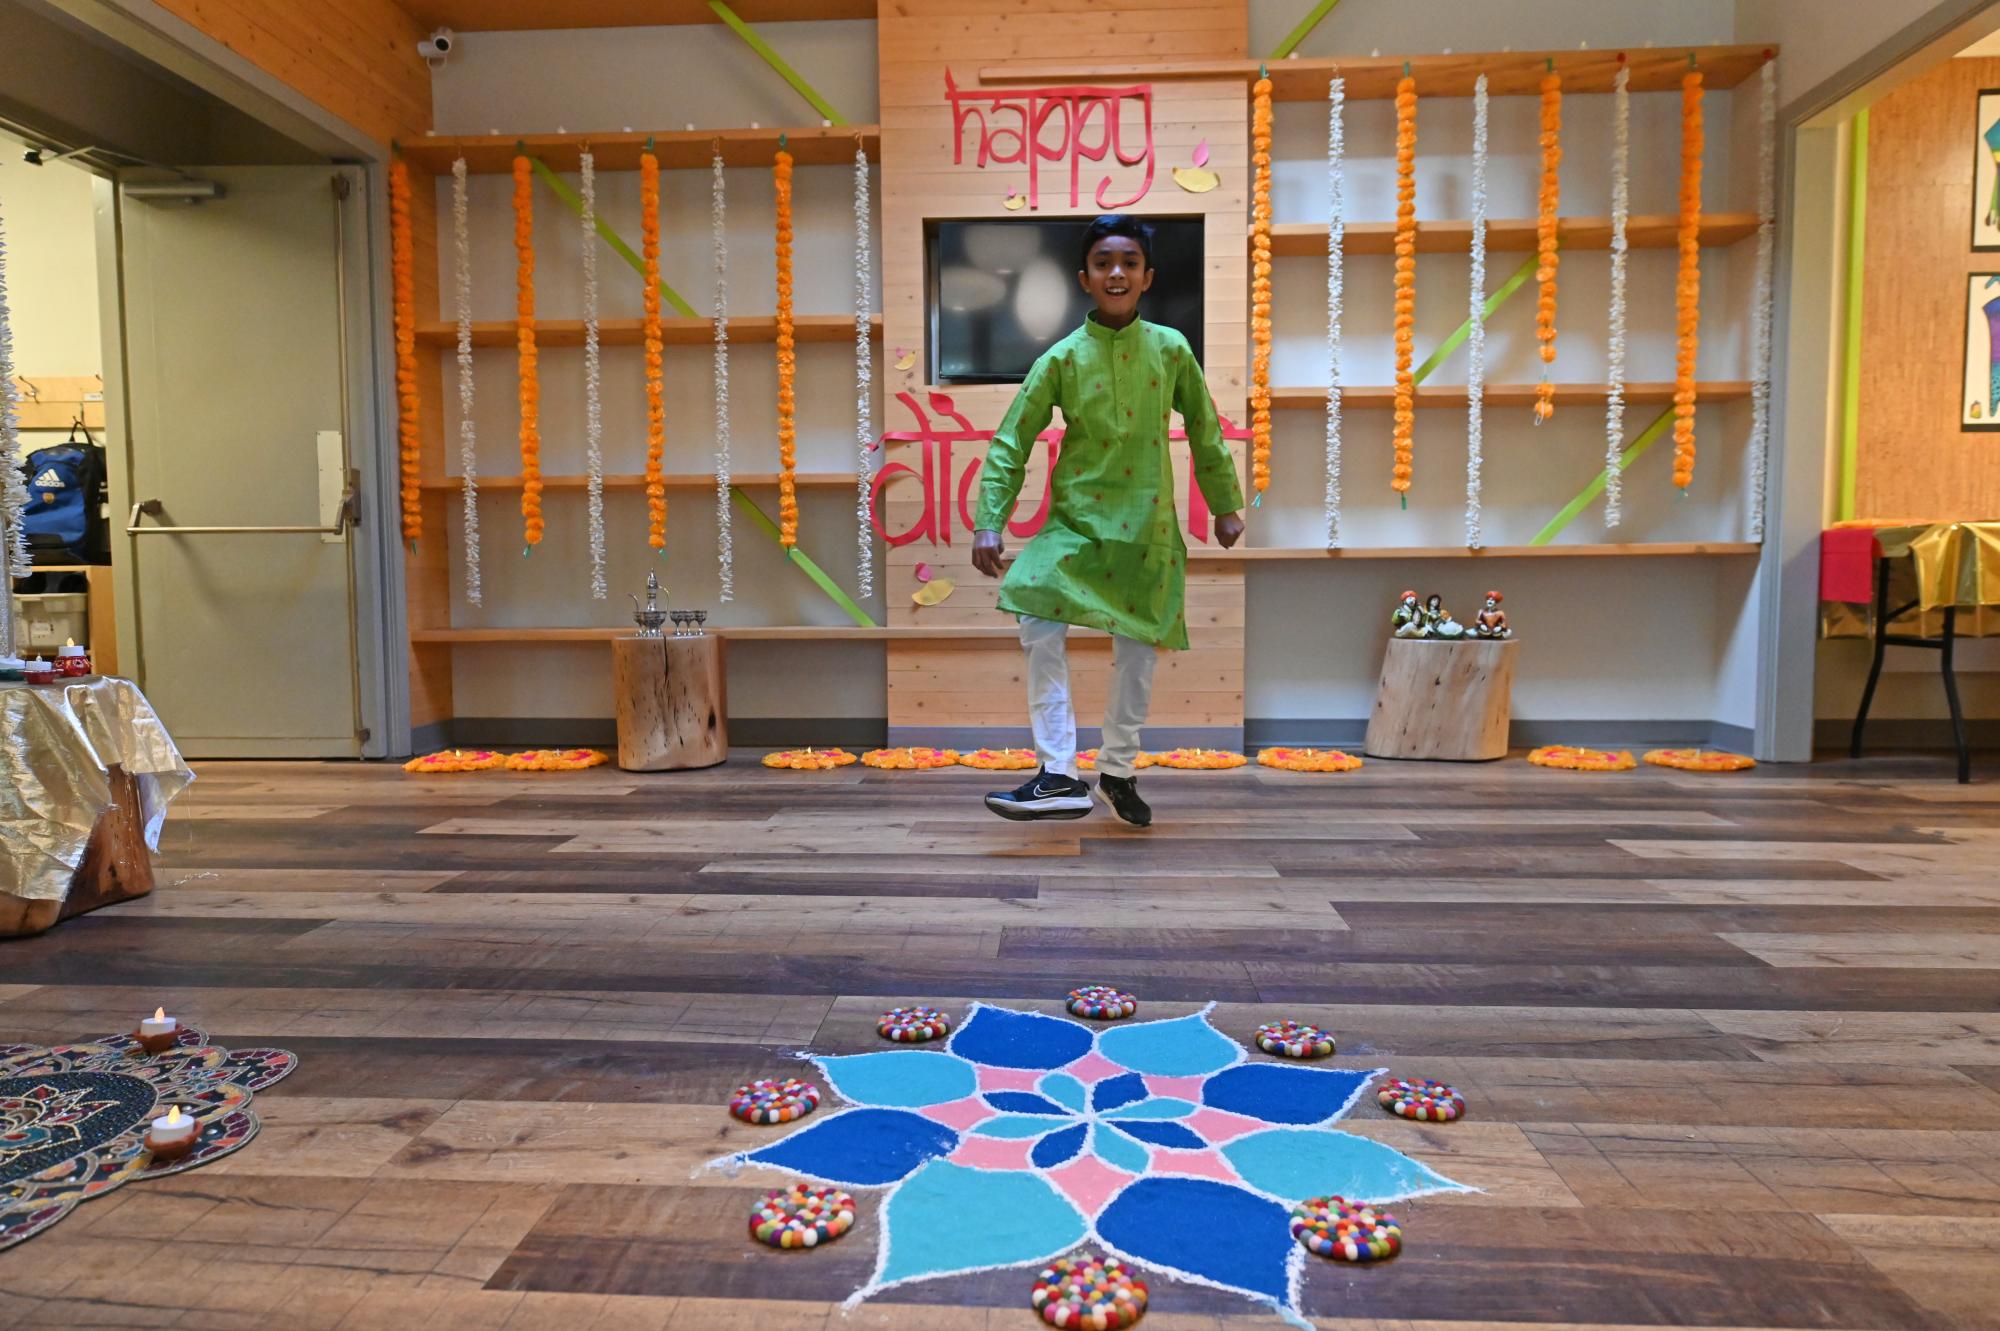 A student performs a dance in the foyer of the Junior School while celebrating Diwali